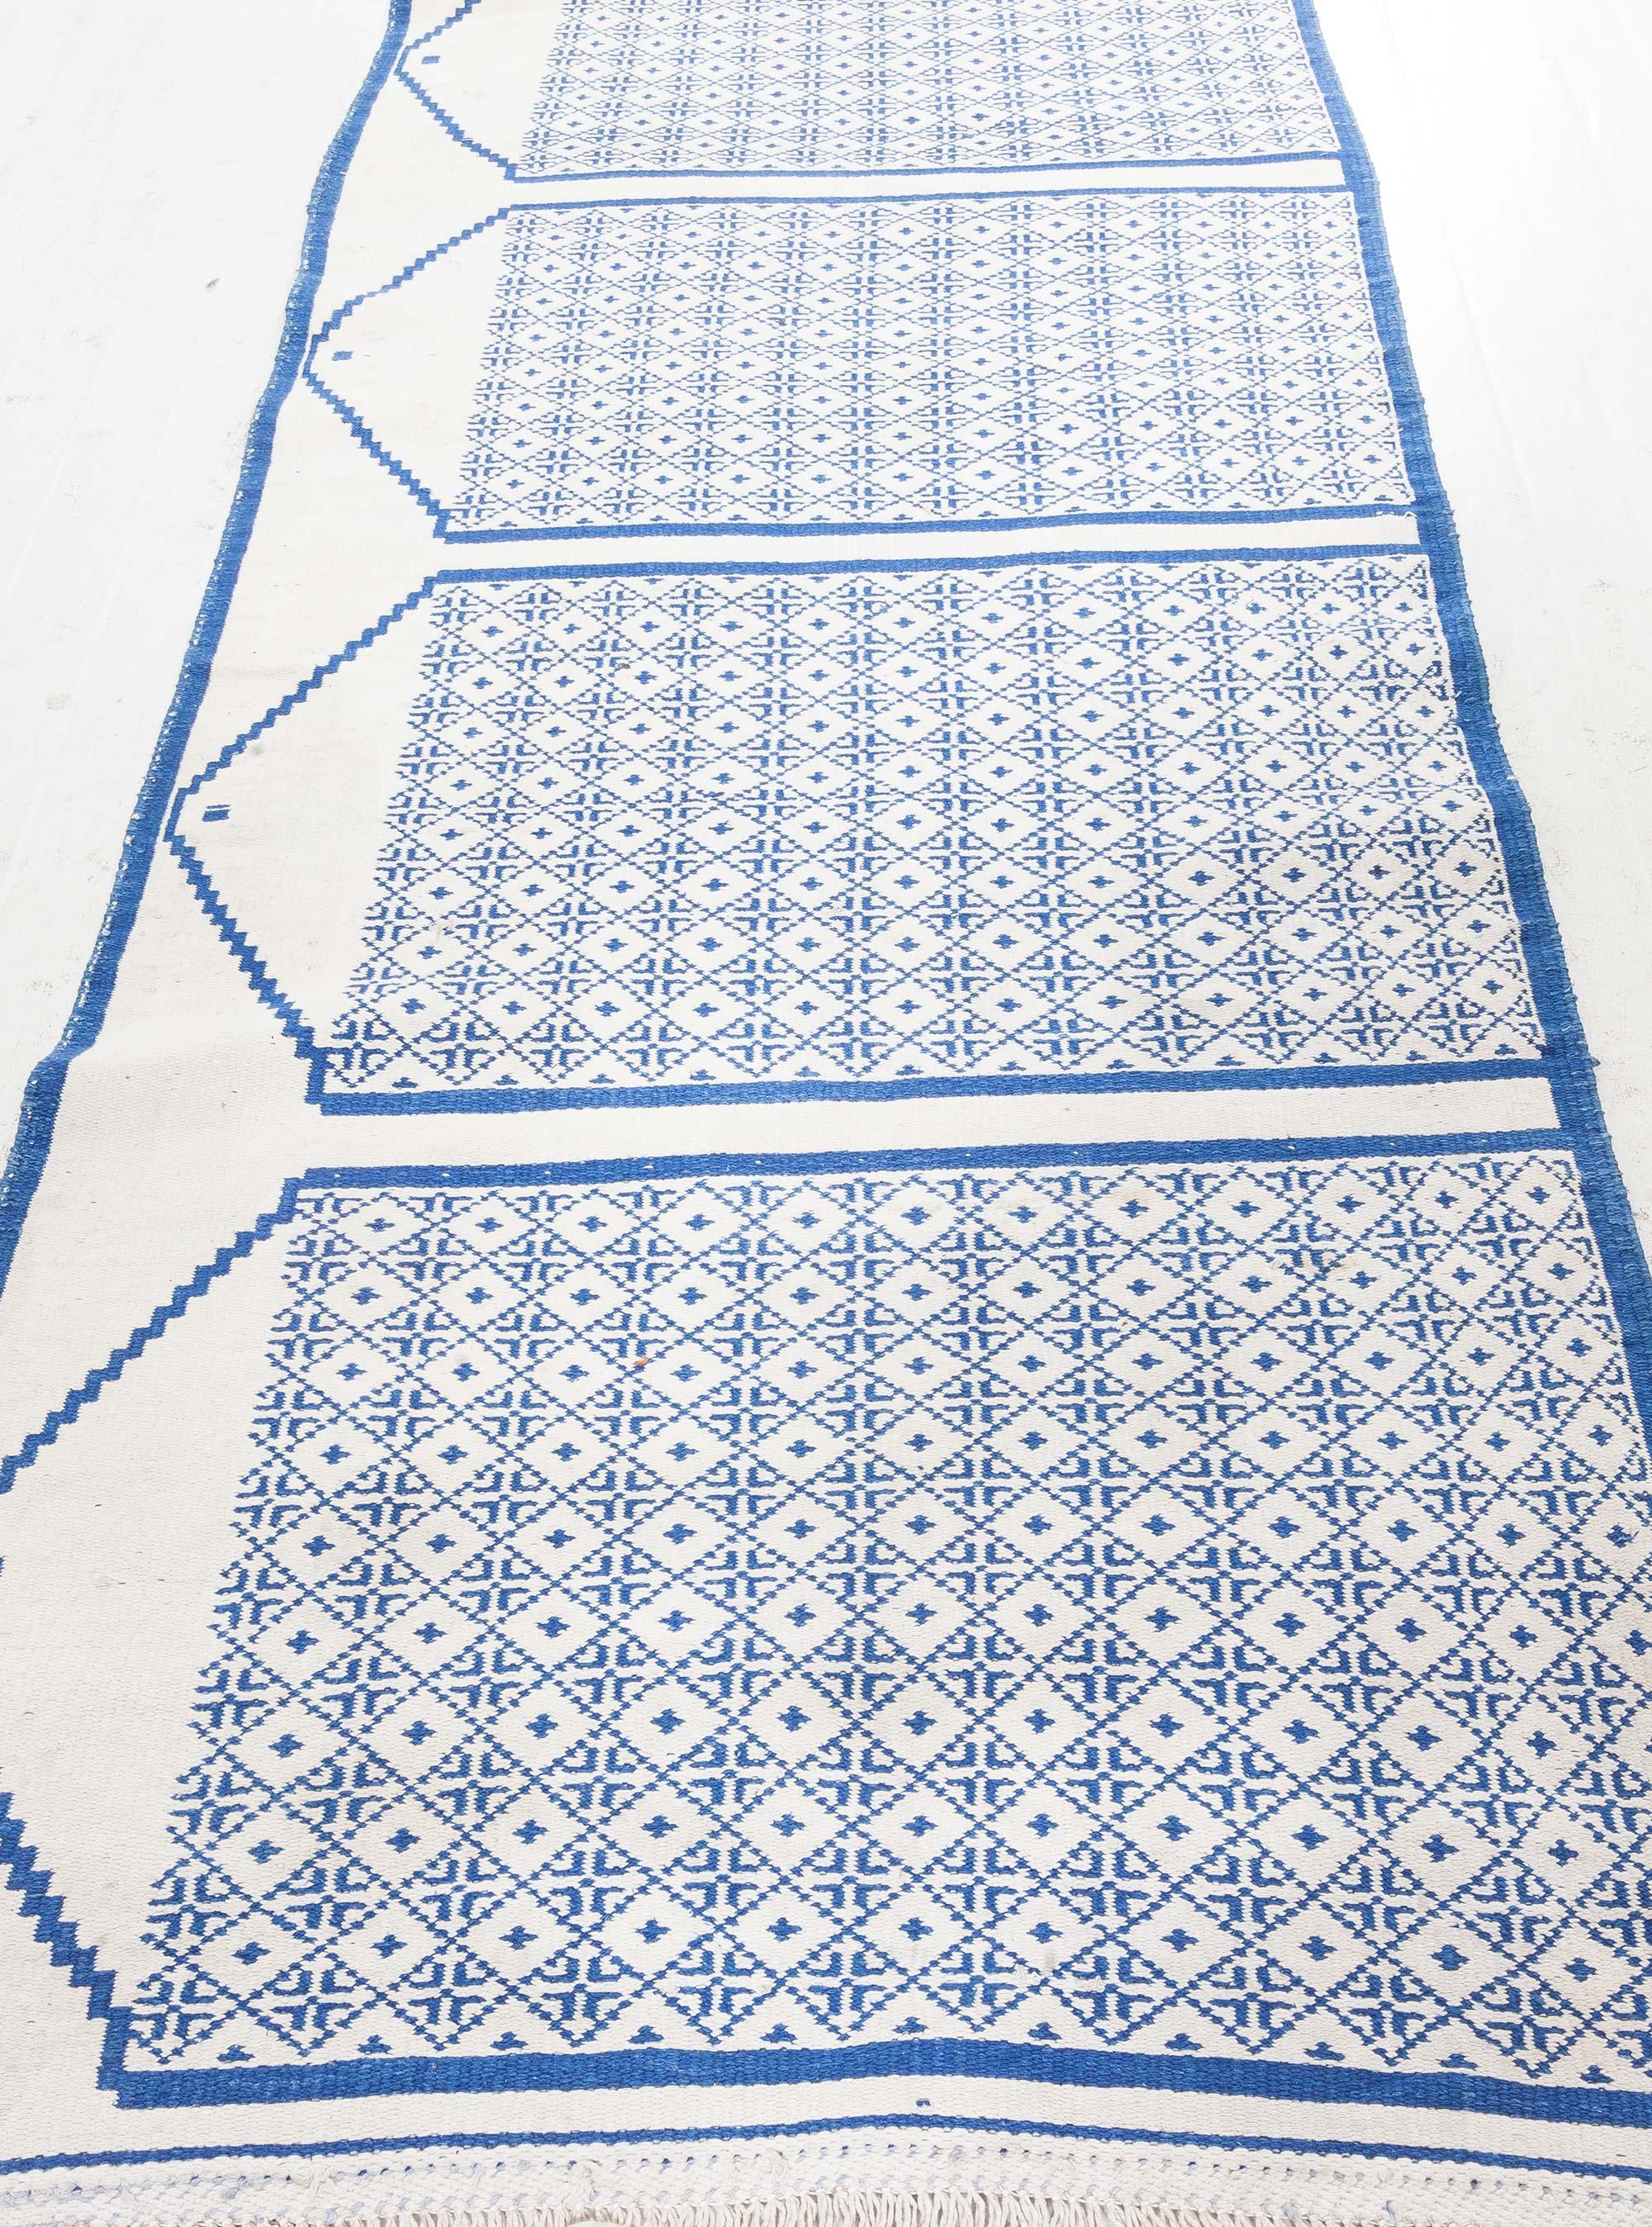 Vintage Indian Cotton Double Sided Runner
Size: 3'5